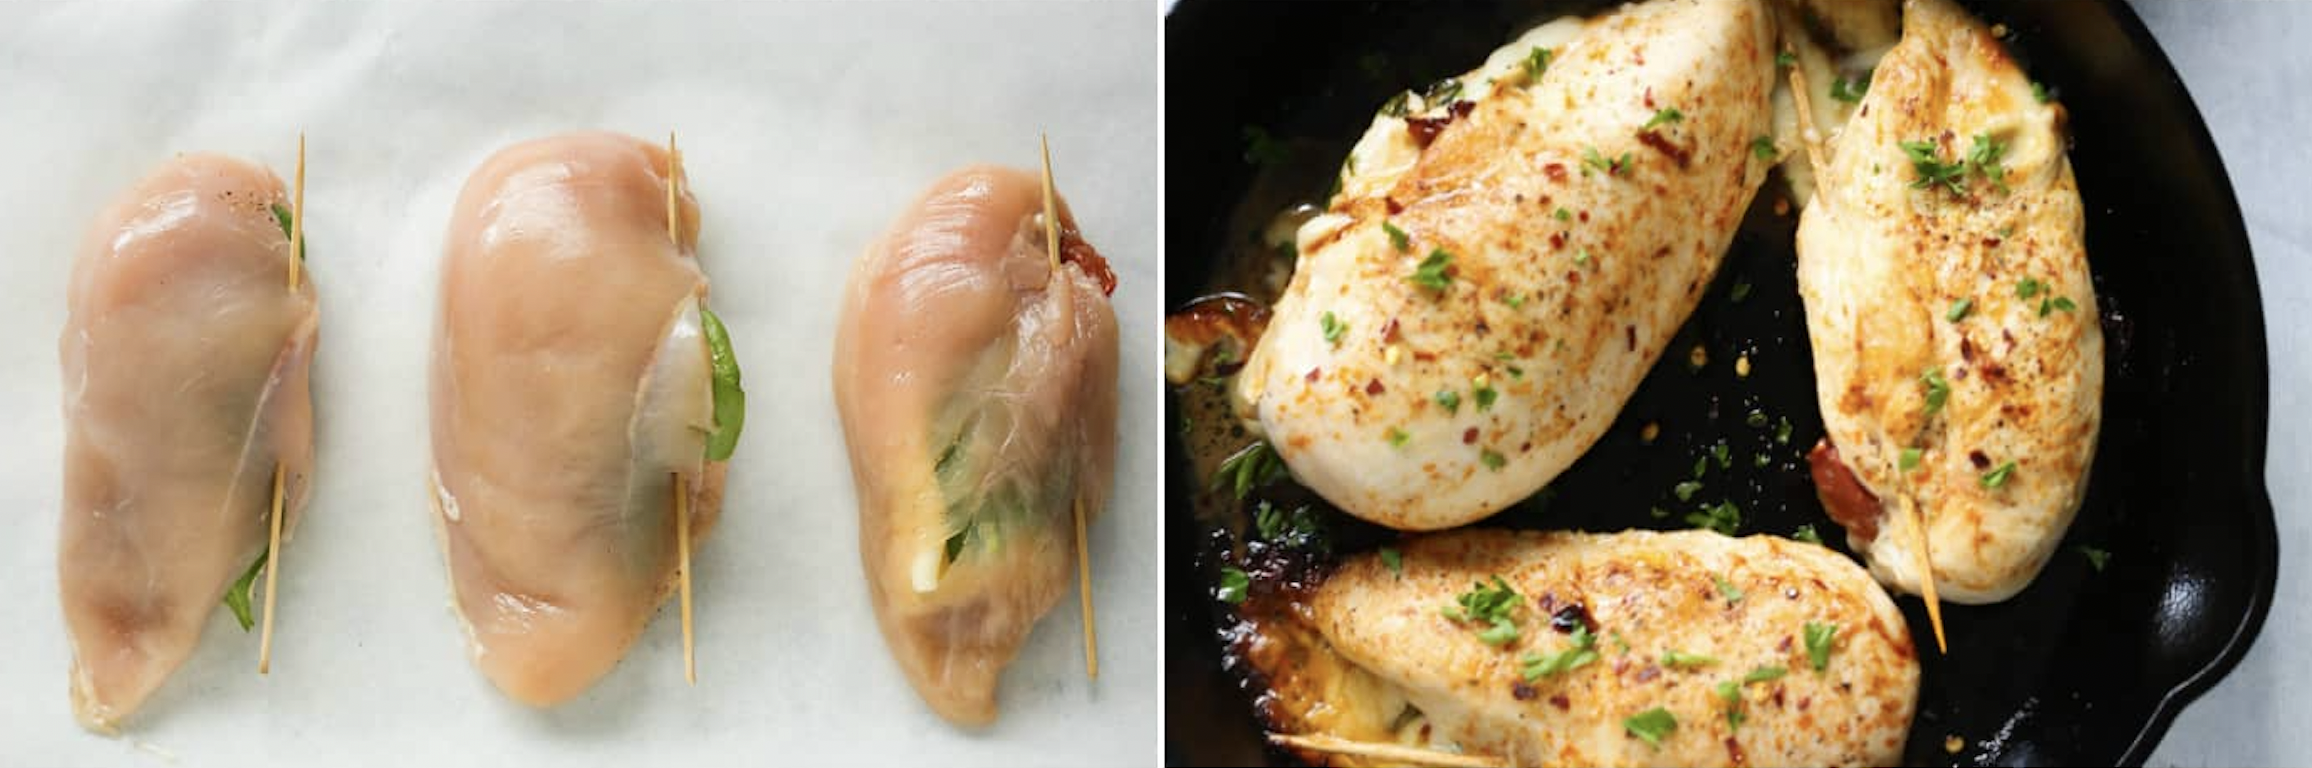 Left: raw, stuffed chicken breasts secured with toothpicks. Right: Seared chicken in skillet.